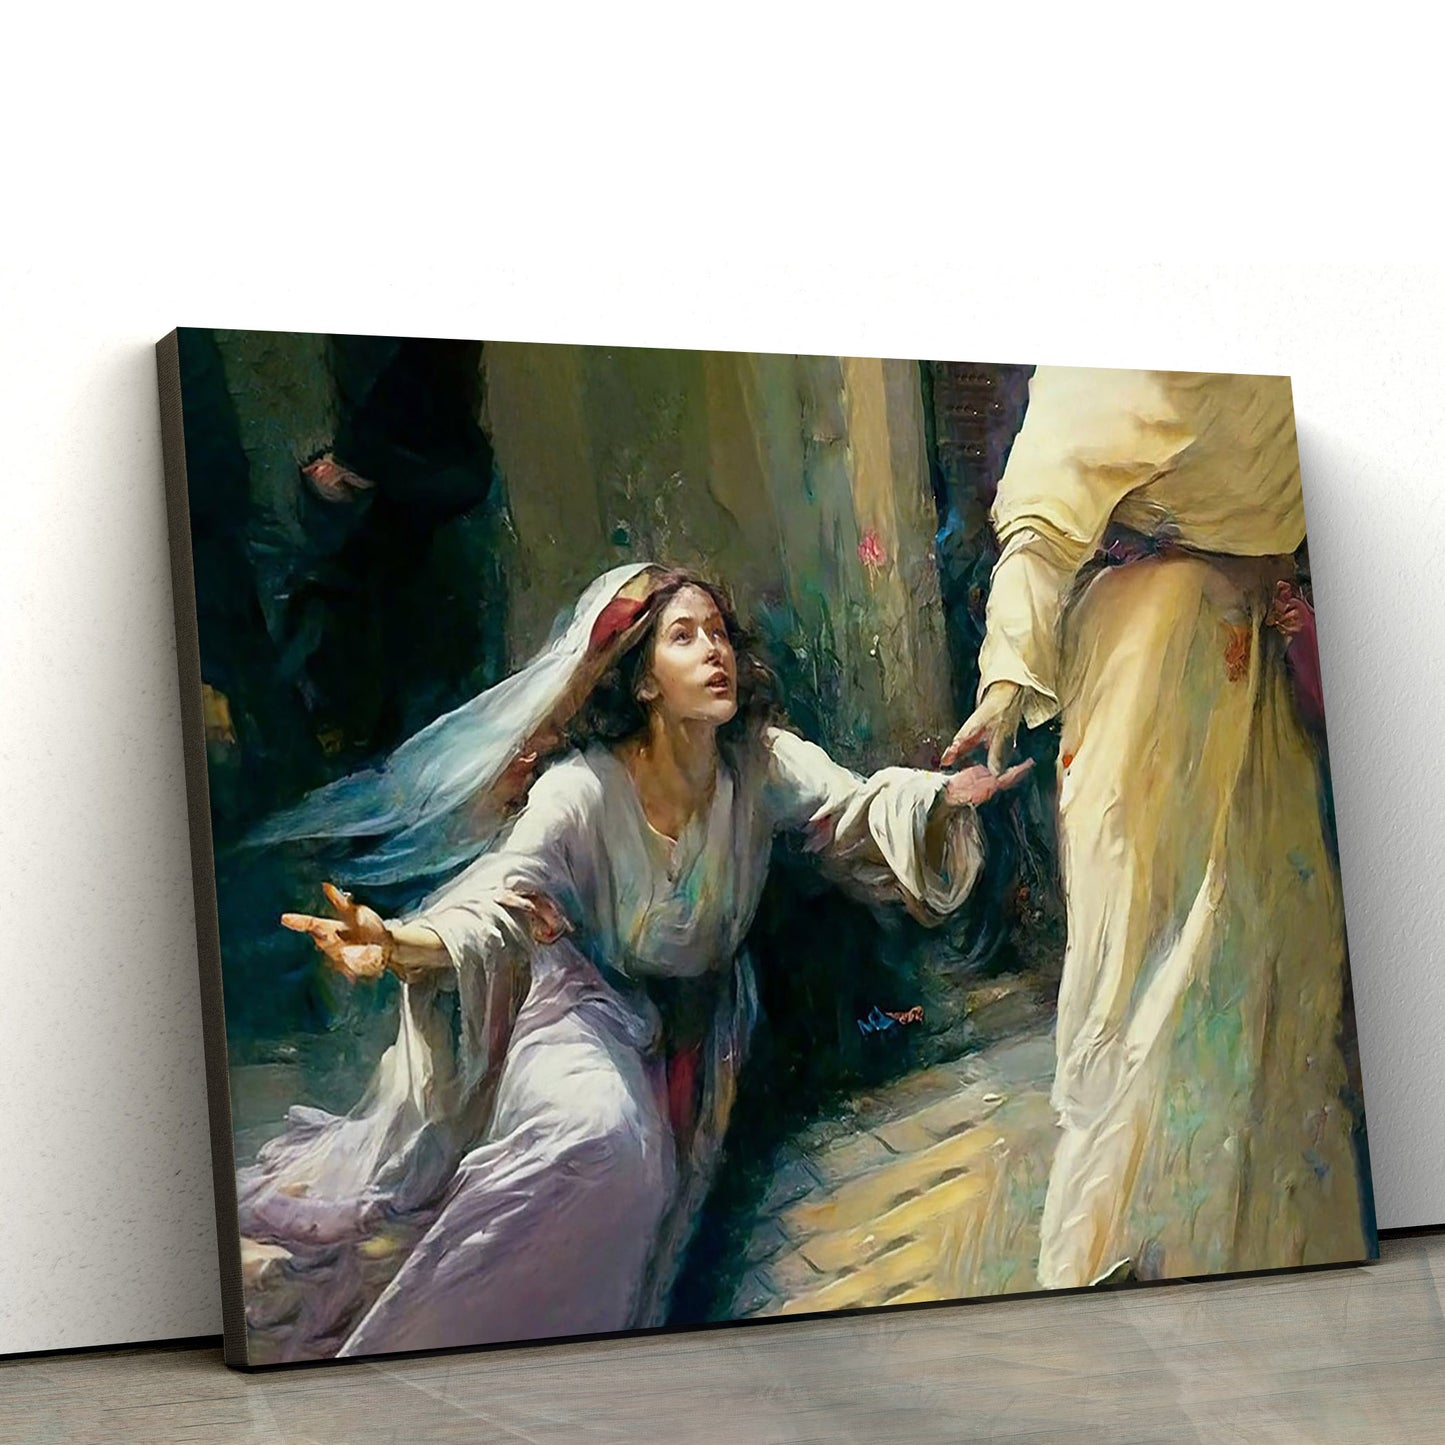 A Woman Healed Christian Art 2 - Canvas Picture - Jesus Canvas Pictures - Christian Wall Art